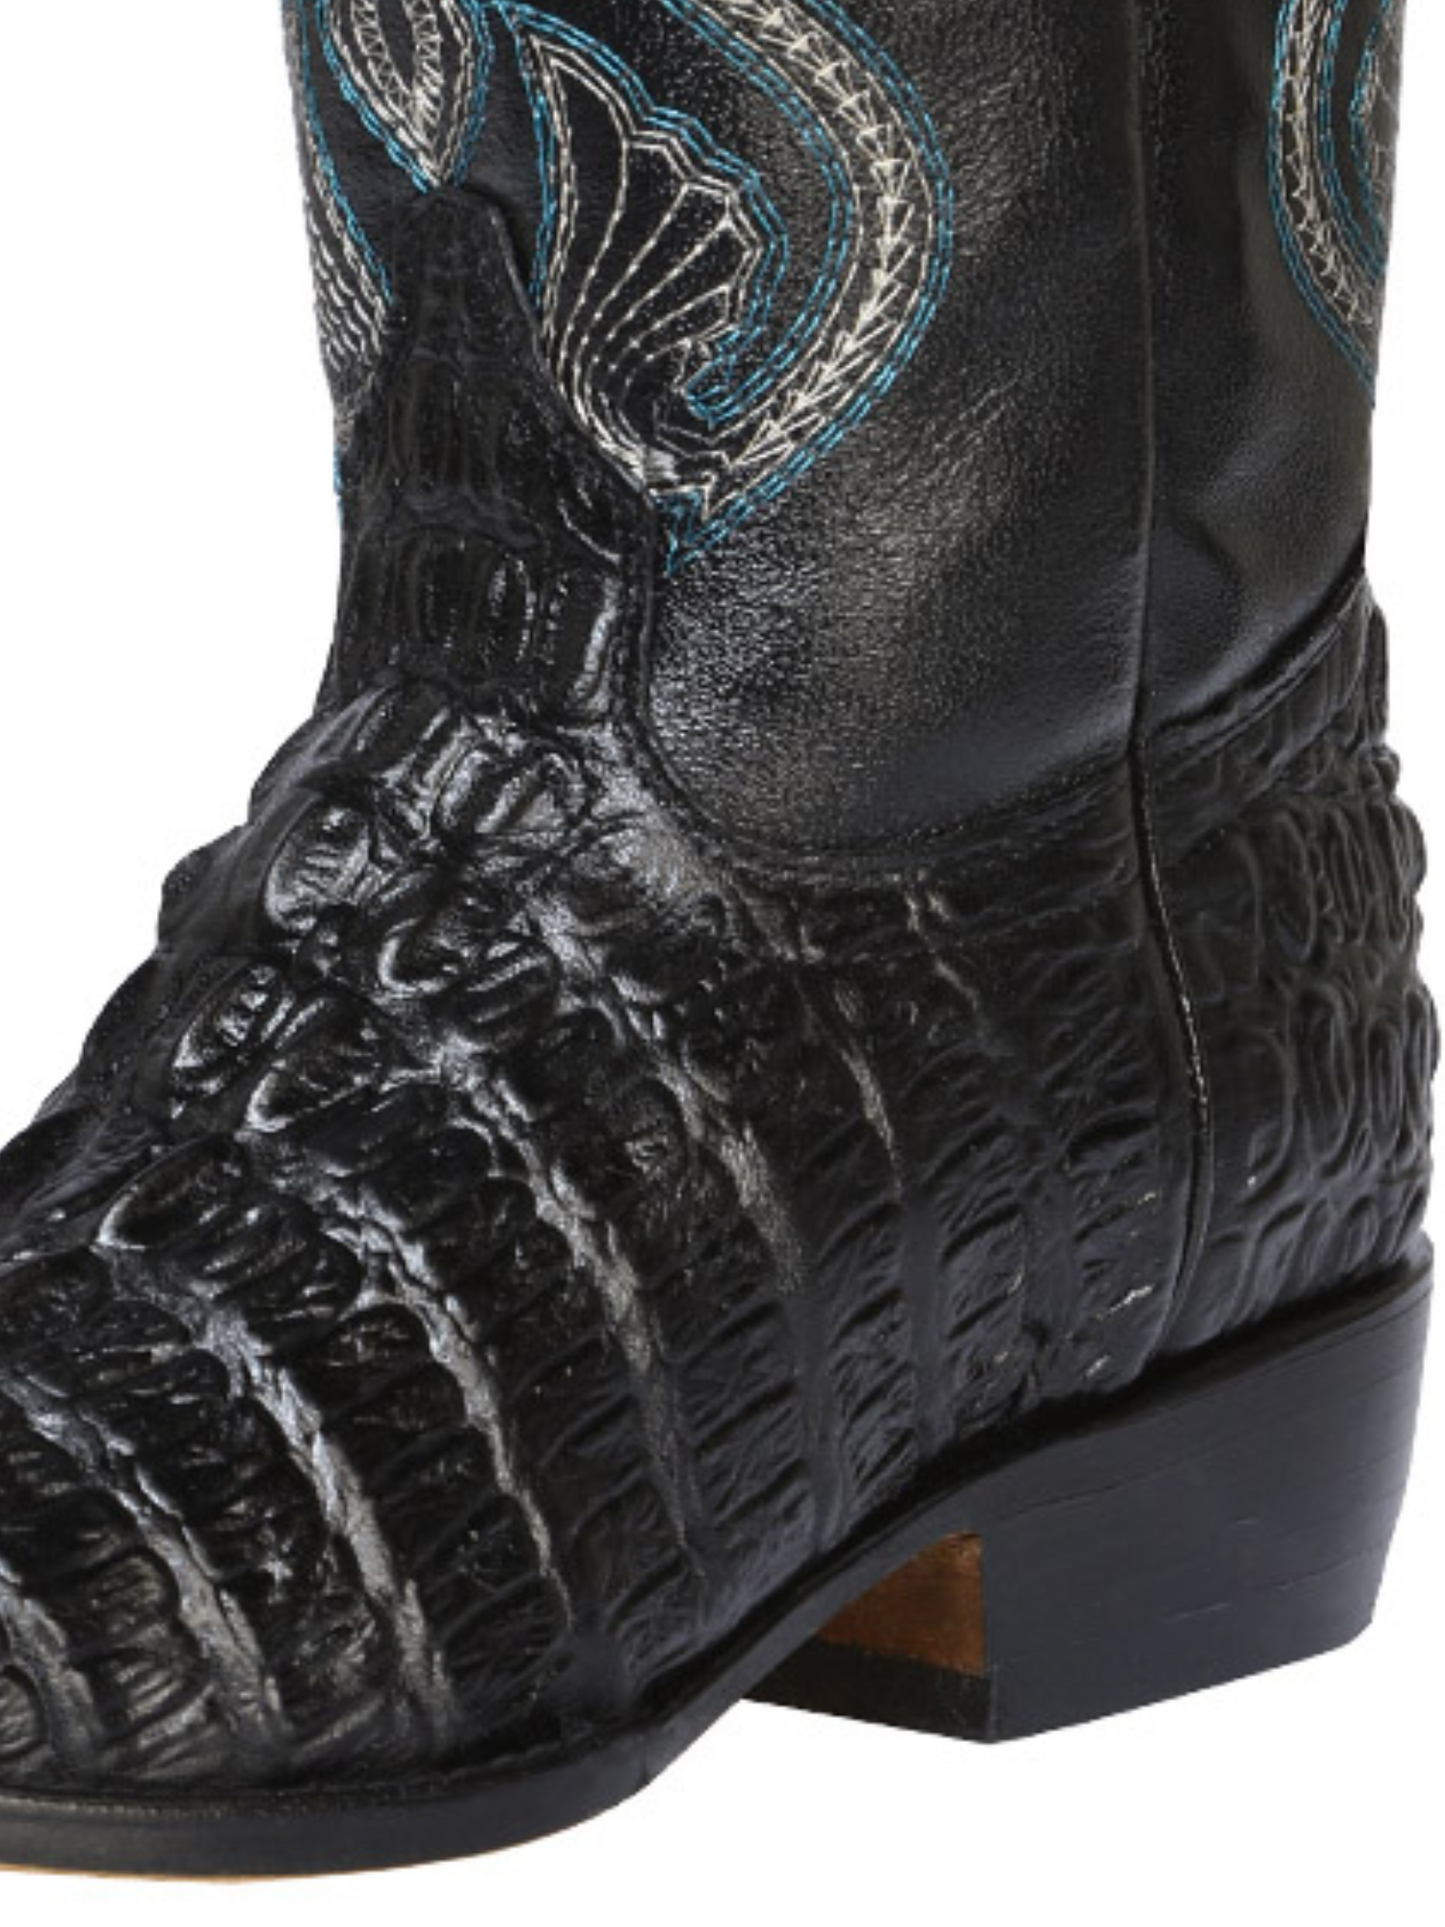 Kids - Cowboy Boots Imitation of Caiman Tail Engraving in Bovine Leather for Children 'Montenegro' - ID: 5832